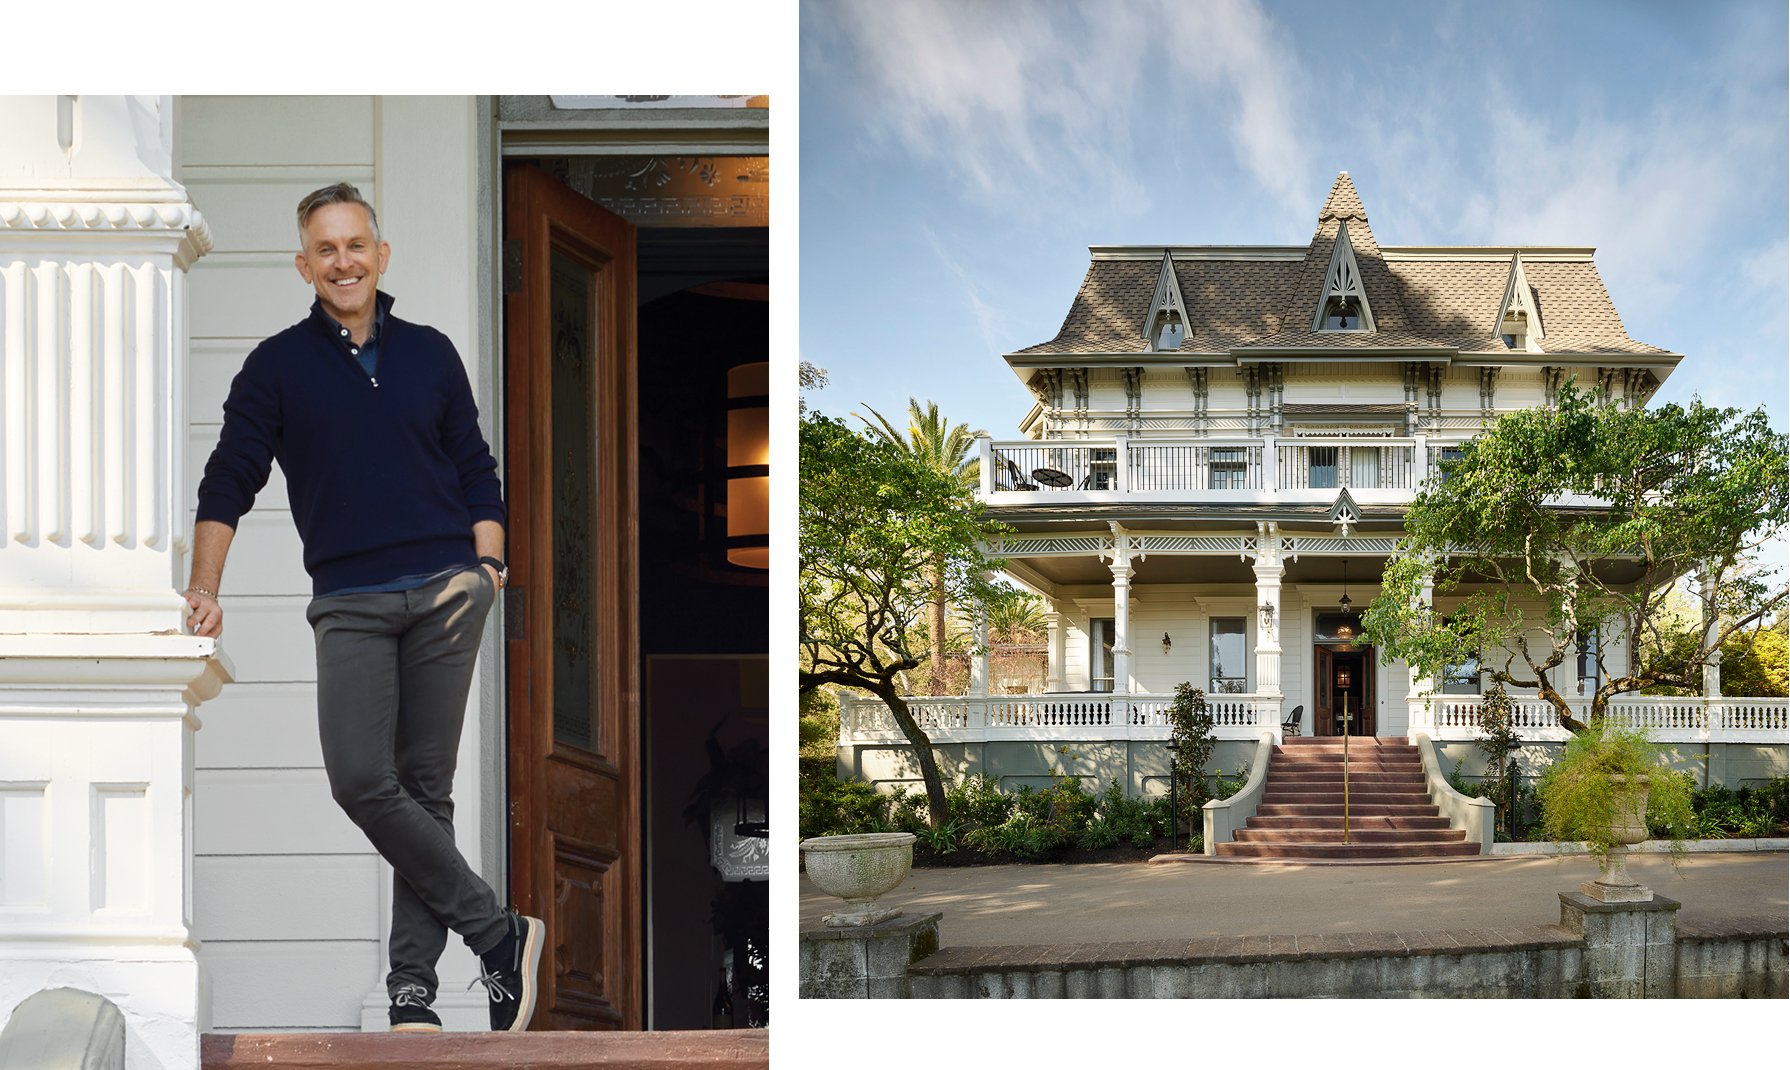 On left is the designer smiling as he leans against an exterior column. On right is a full view of the front exterior of the house.